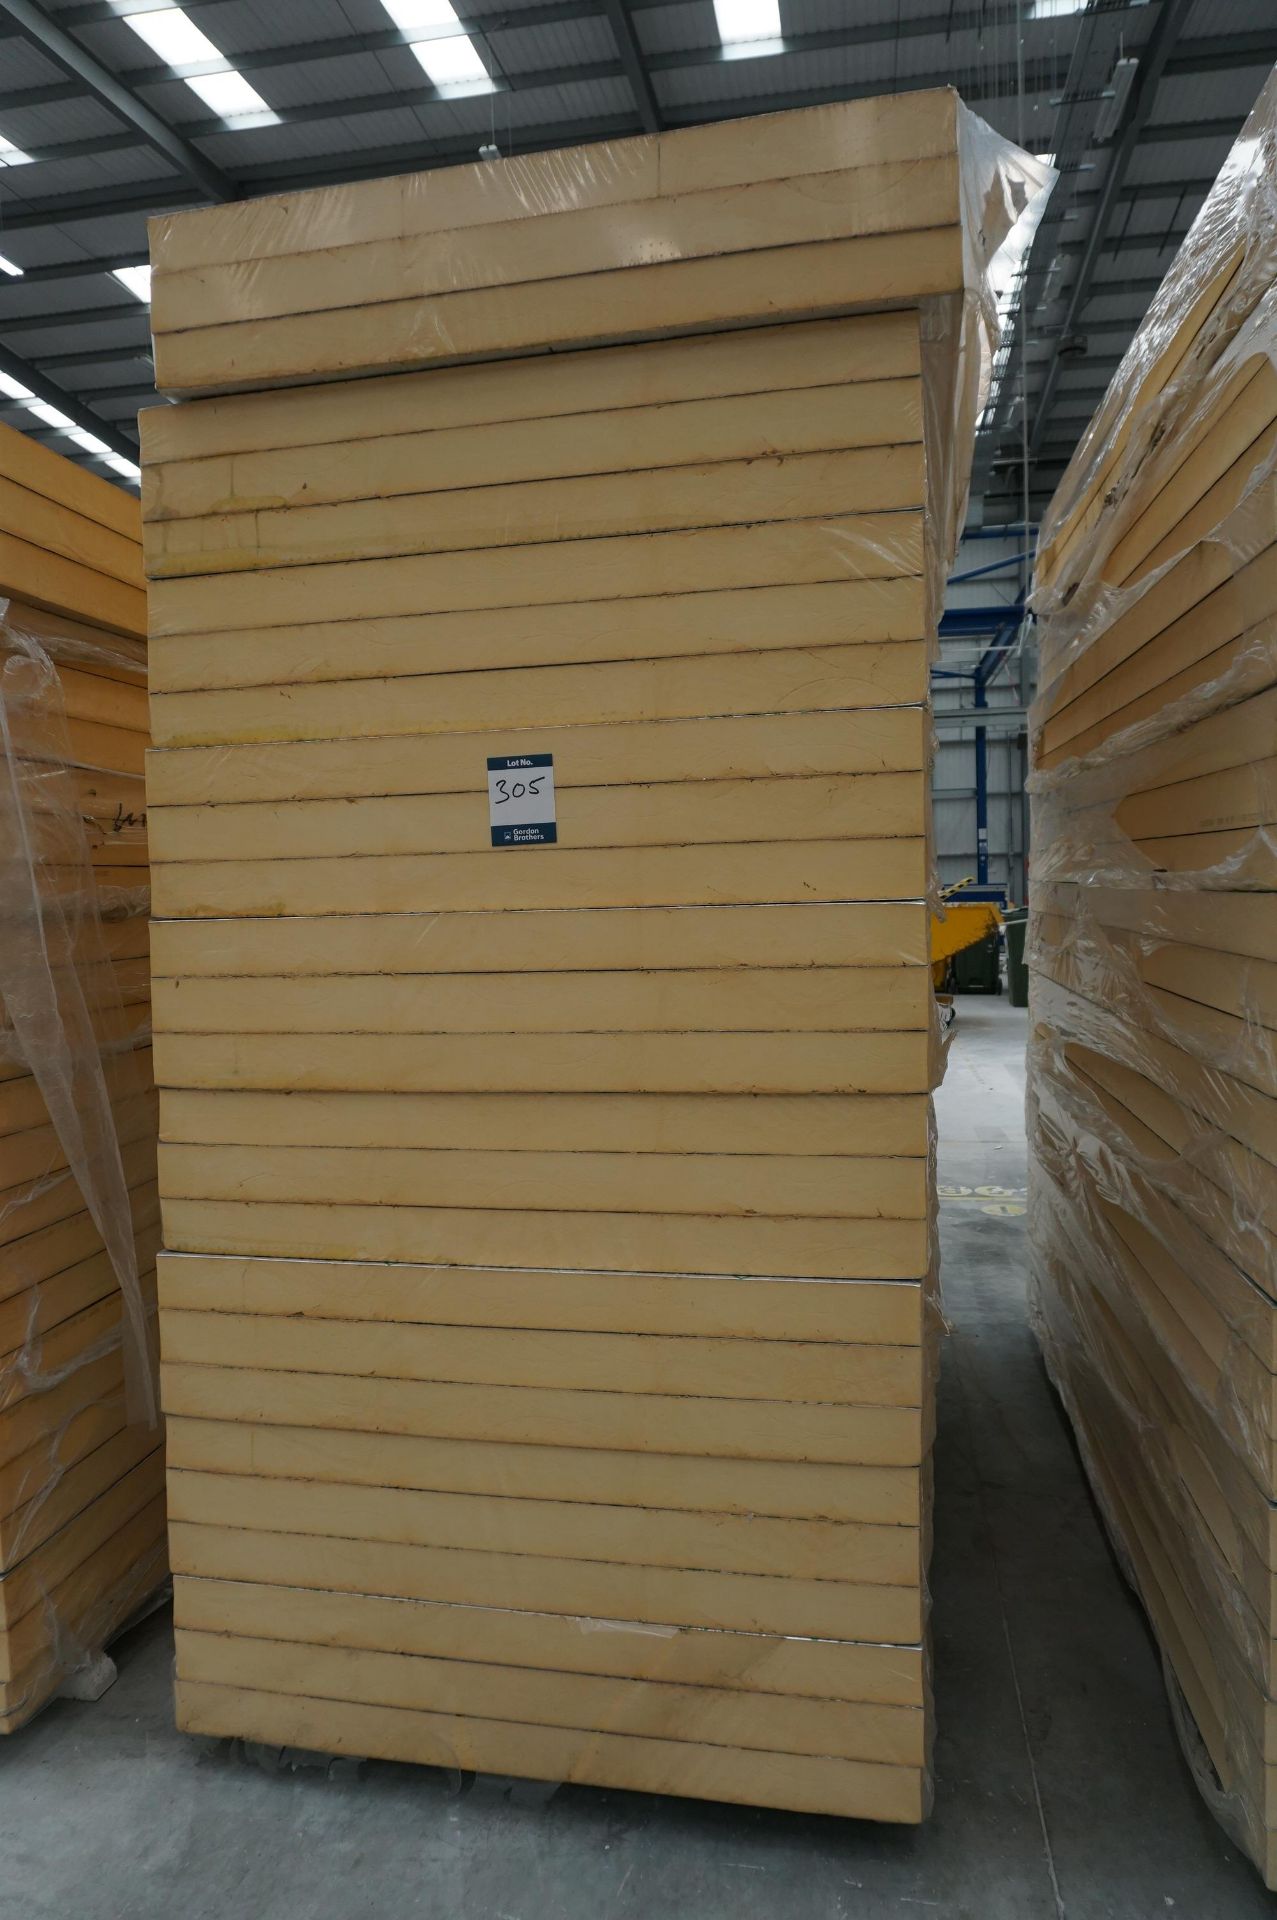 27x (no.) Kingspan, Therma TP10 insulation boards, 1200 x 2400 x 90mm